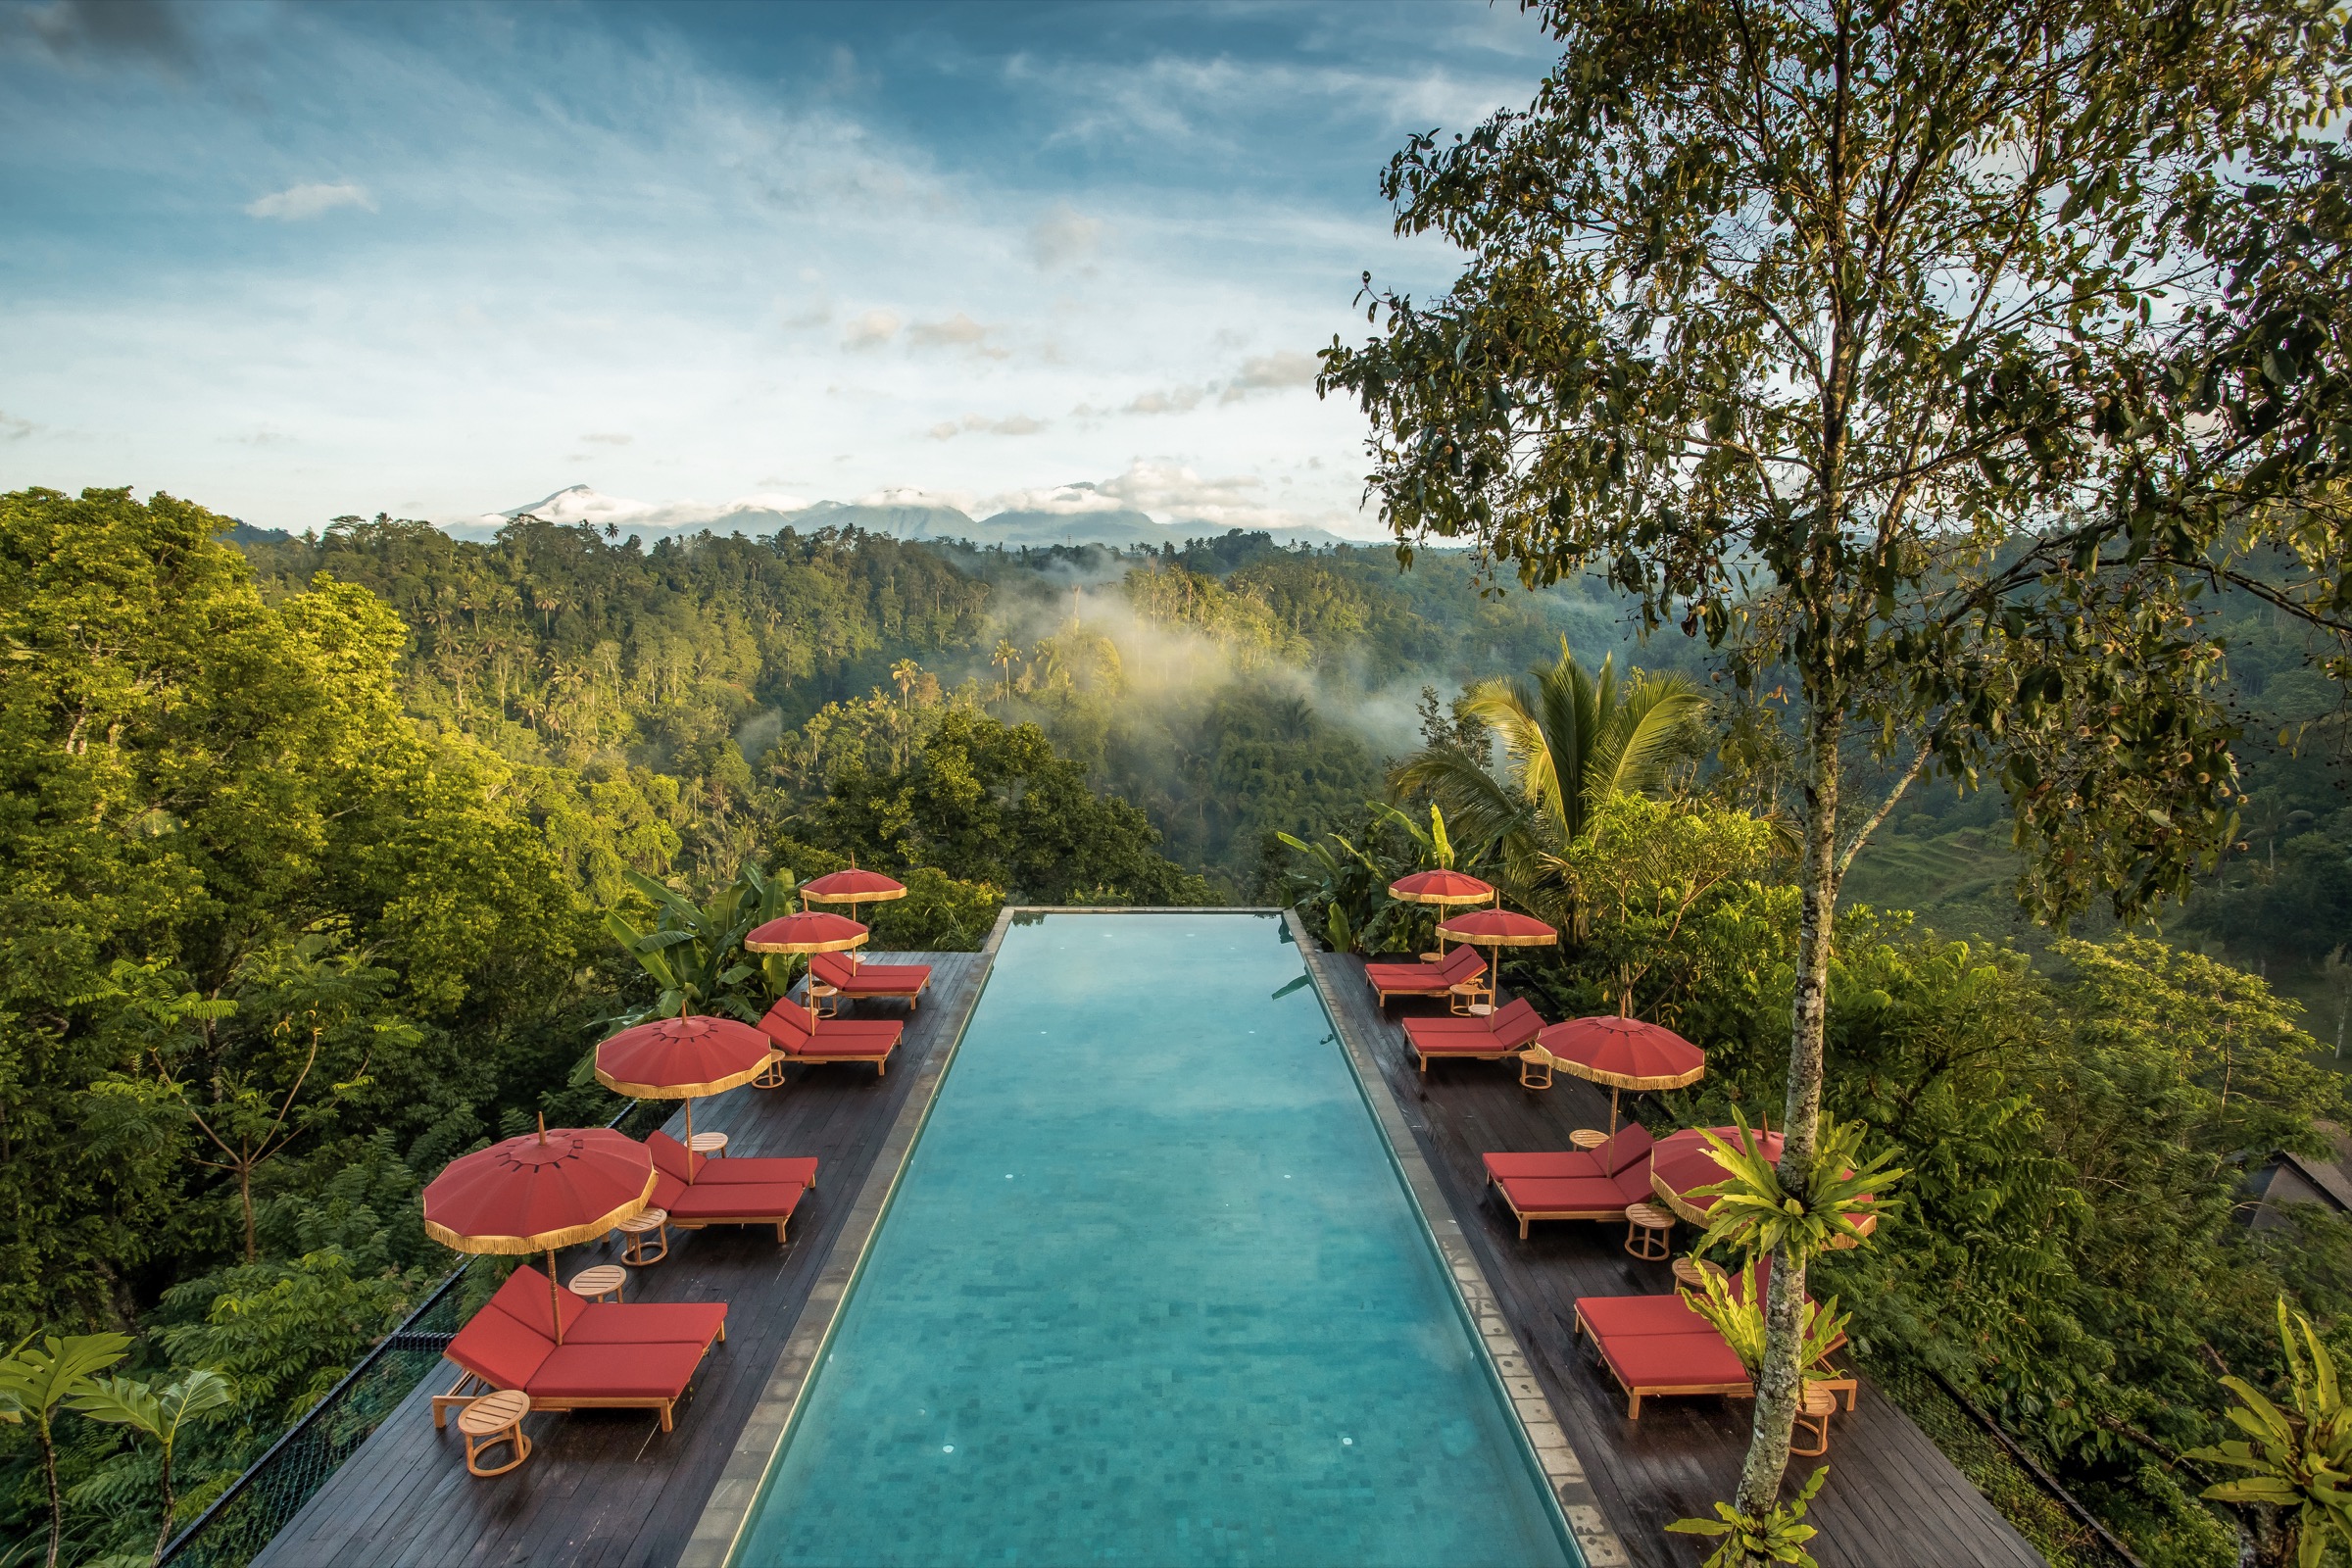 Bali, Indonesia: World's Greatest Places 2022 | TIME